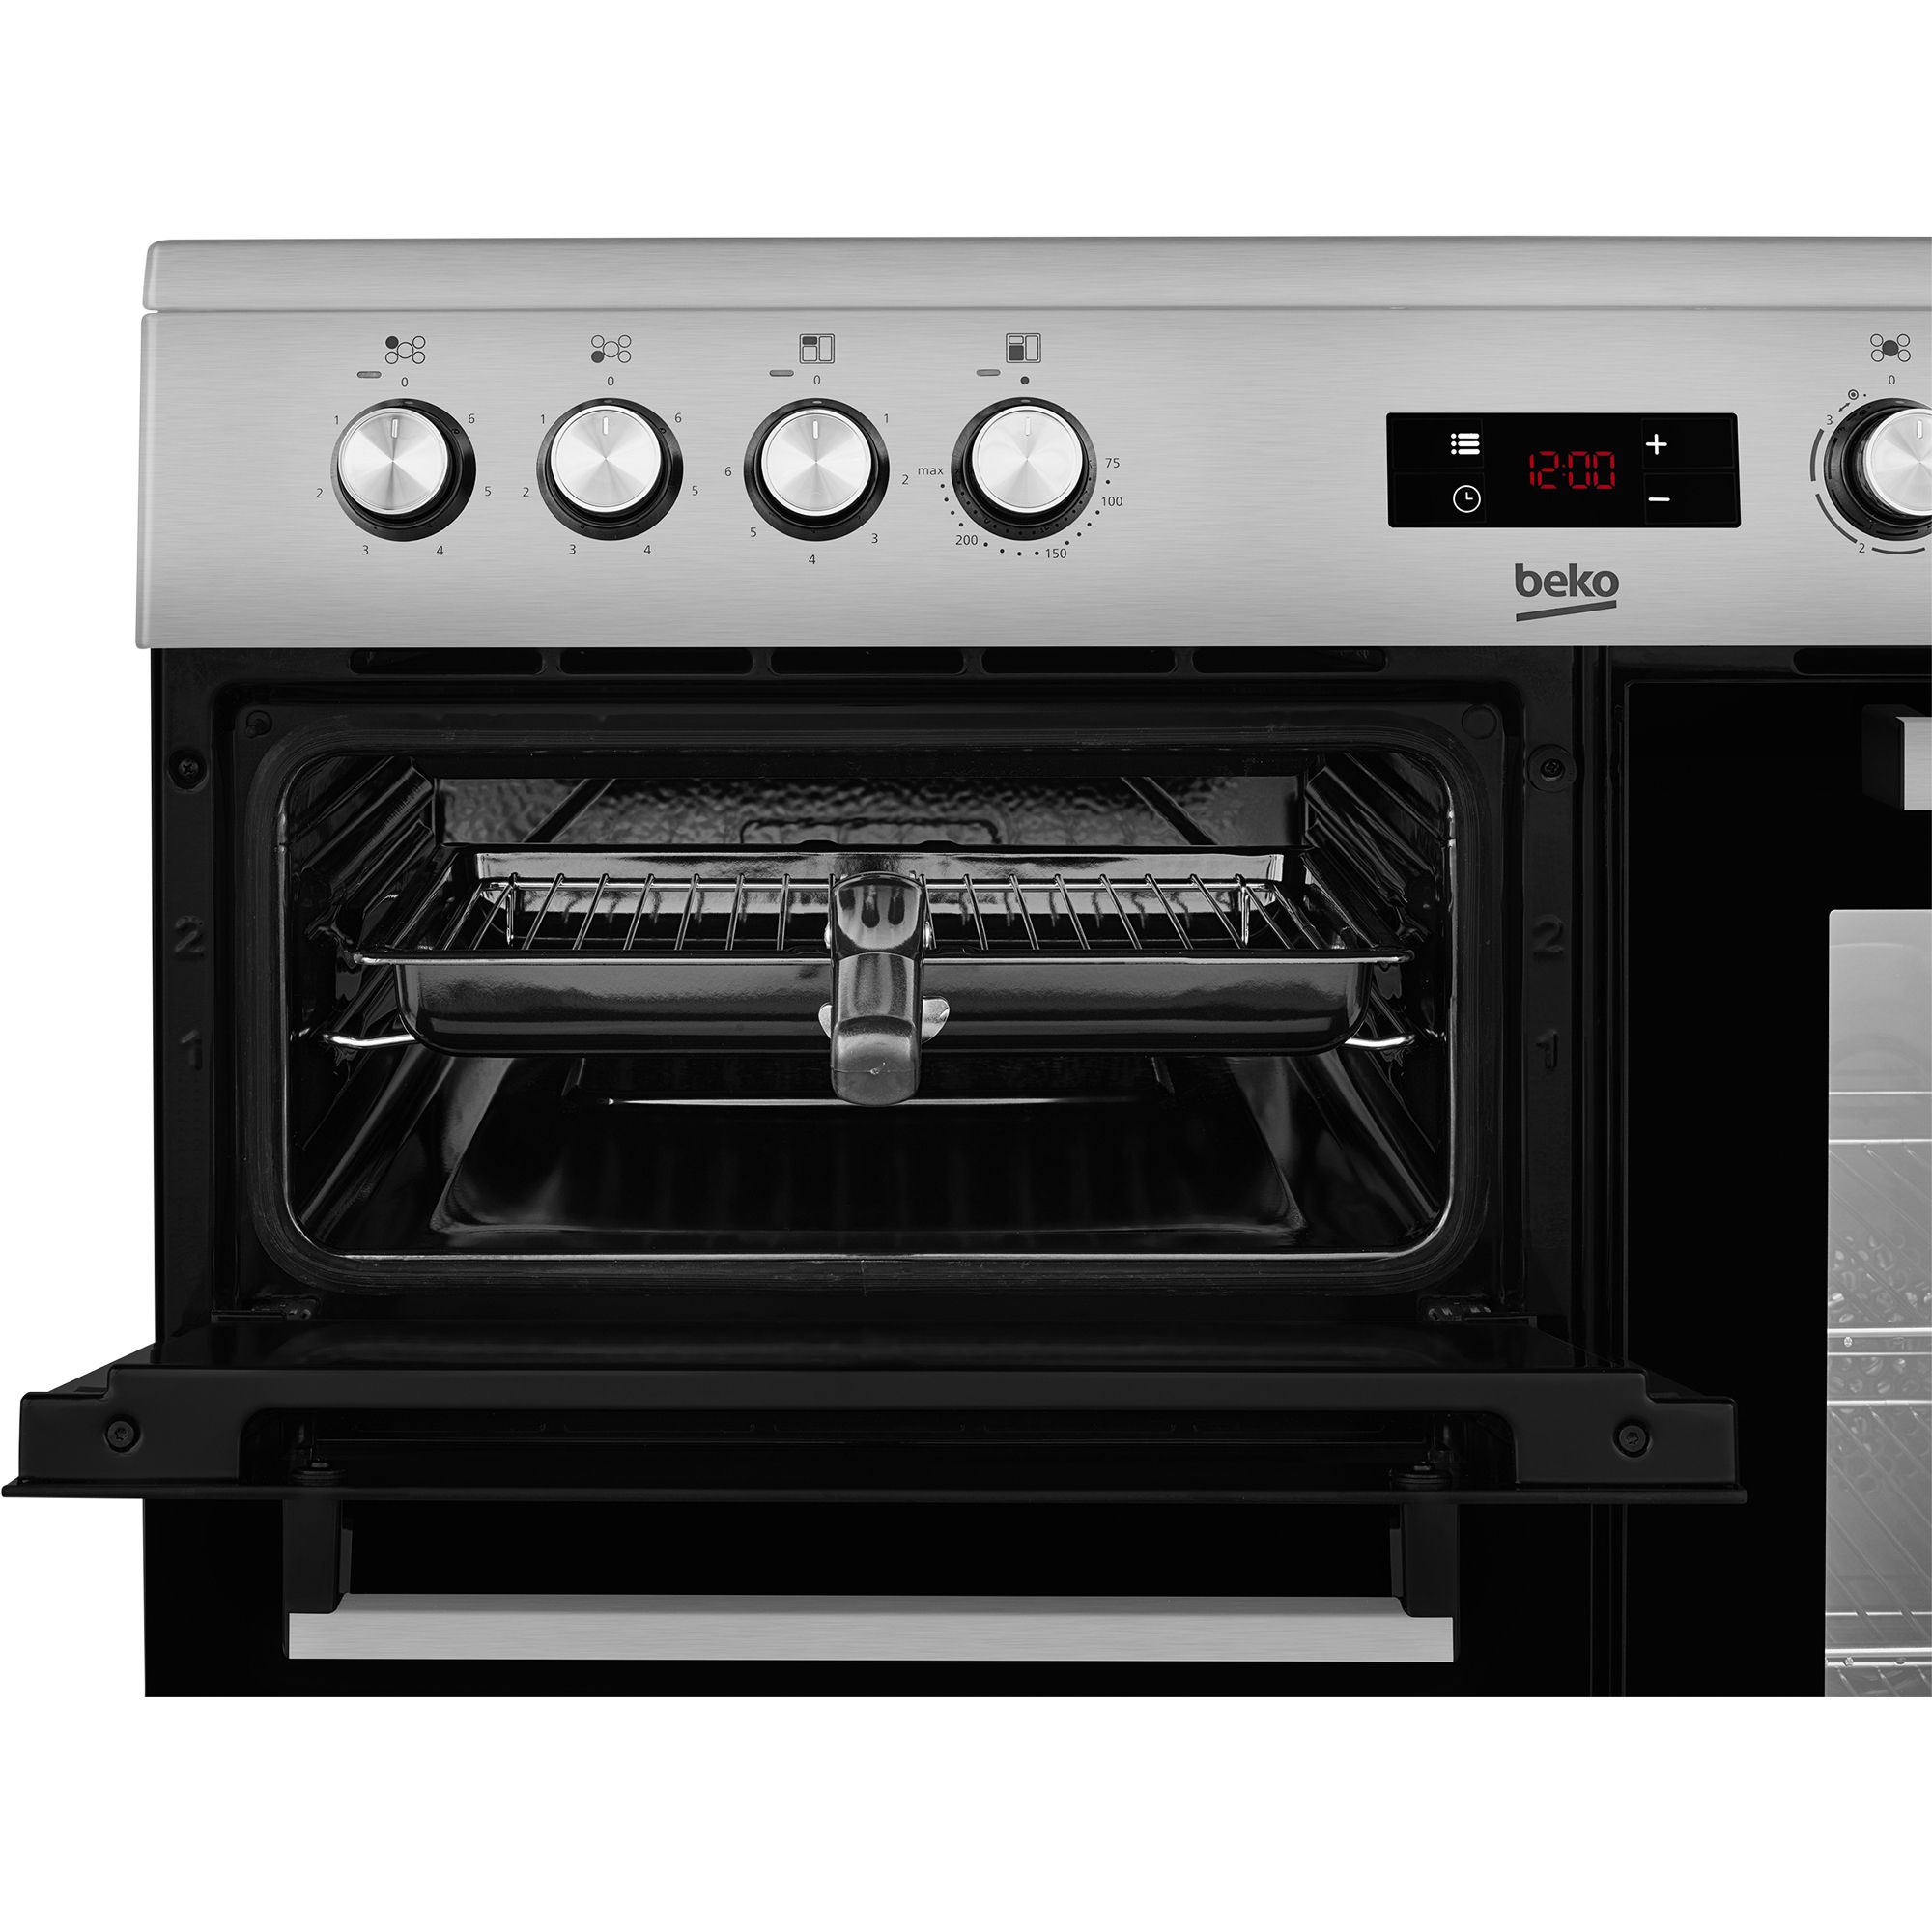 Beko KDVC90X Freestanding Electric Range cooker with Ceramic Hob - Stainless steel effect